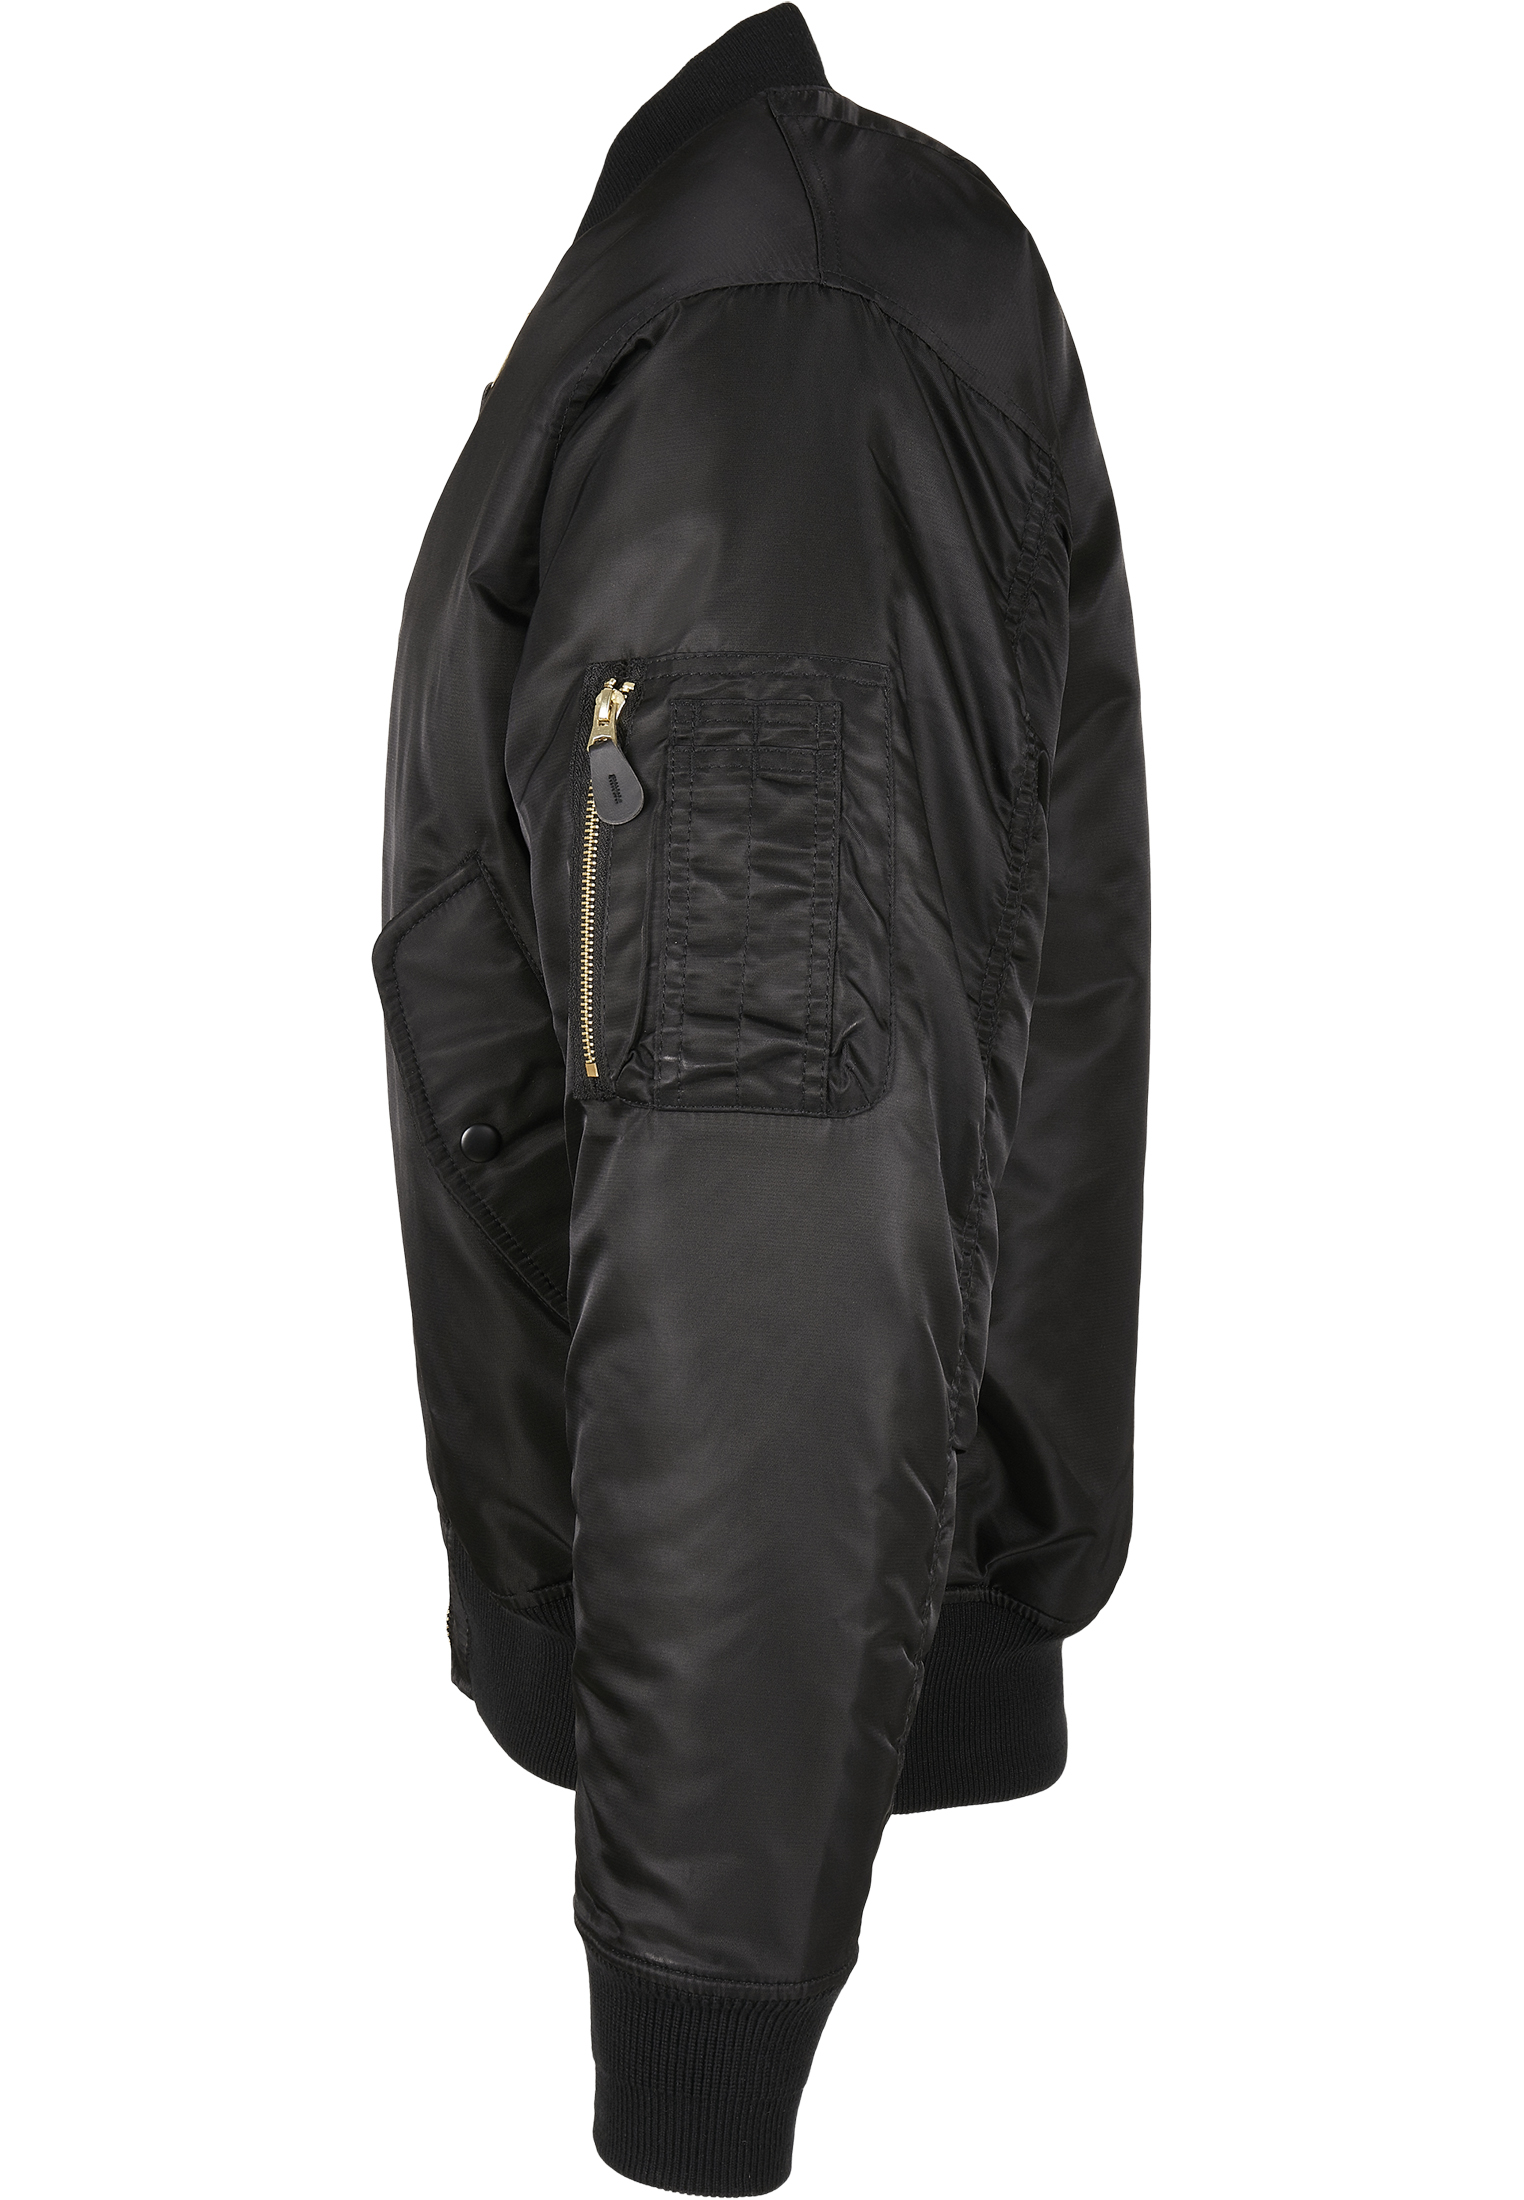 Build Your Brandit MA1 Jacket in Farbe black